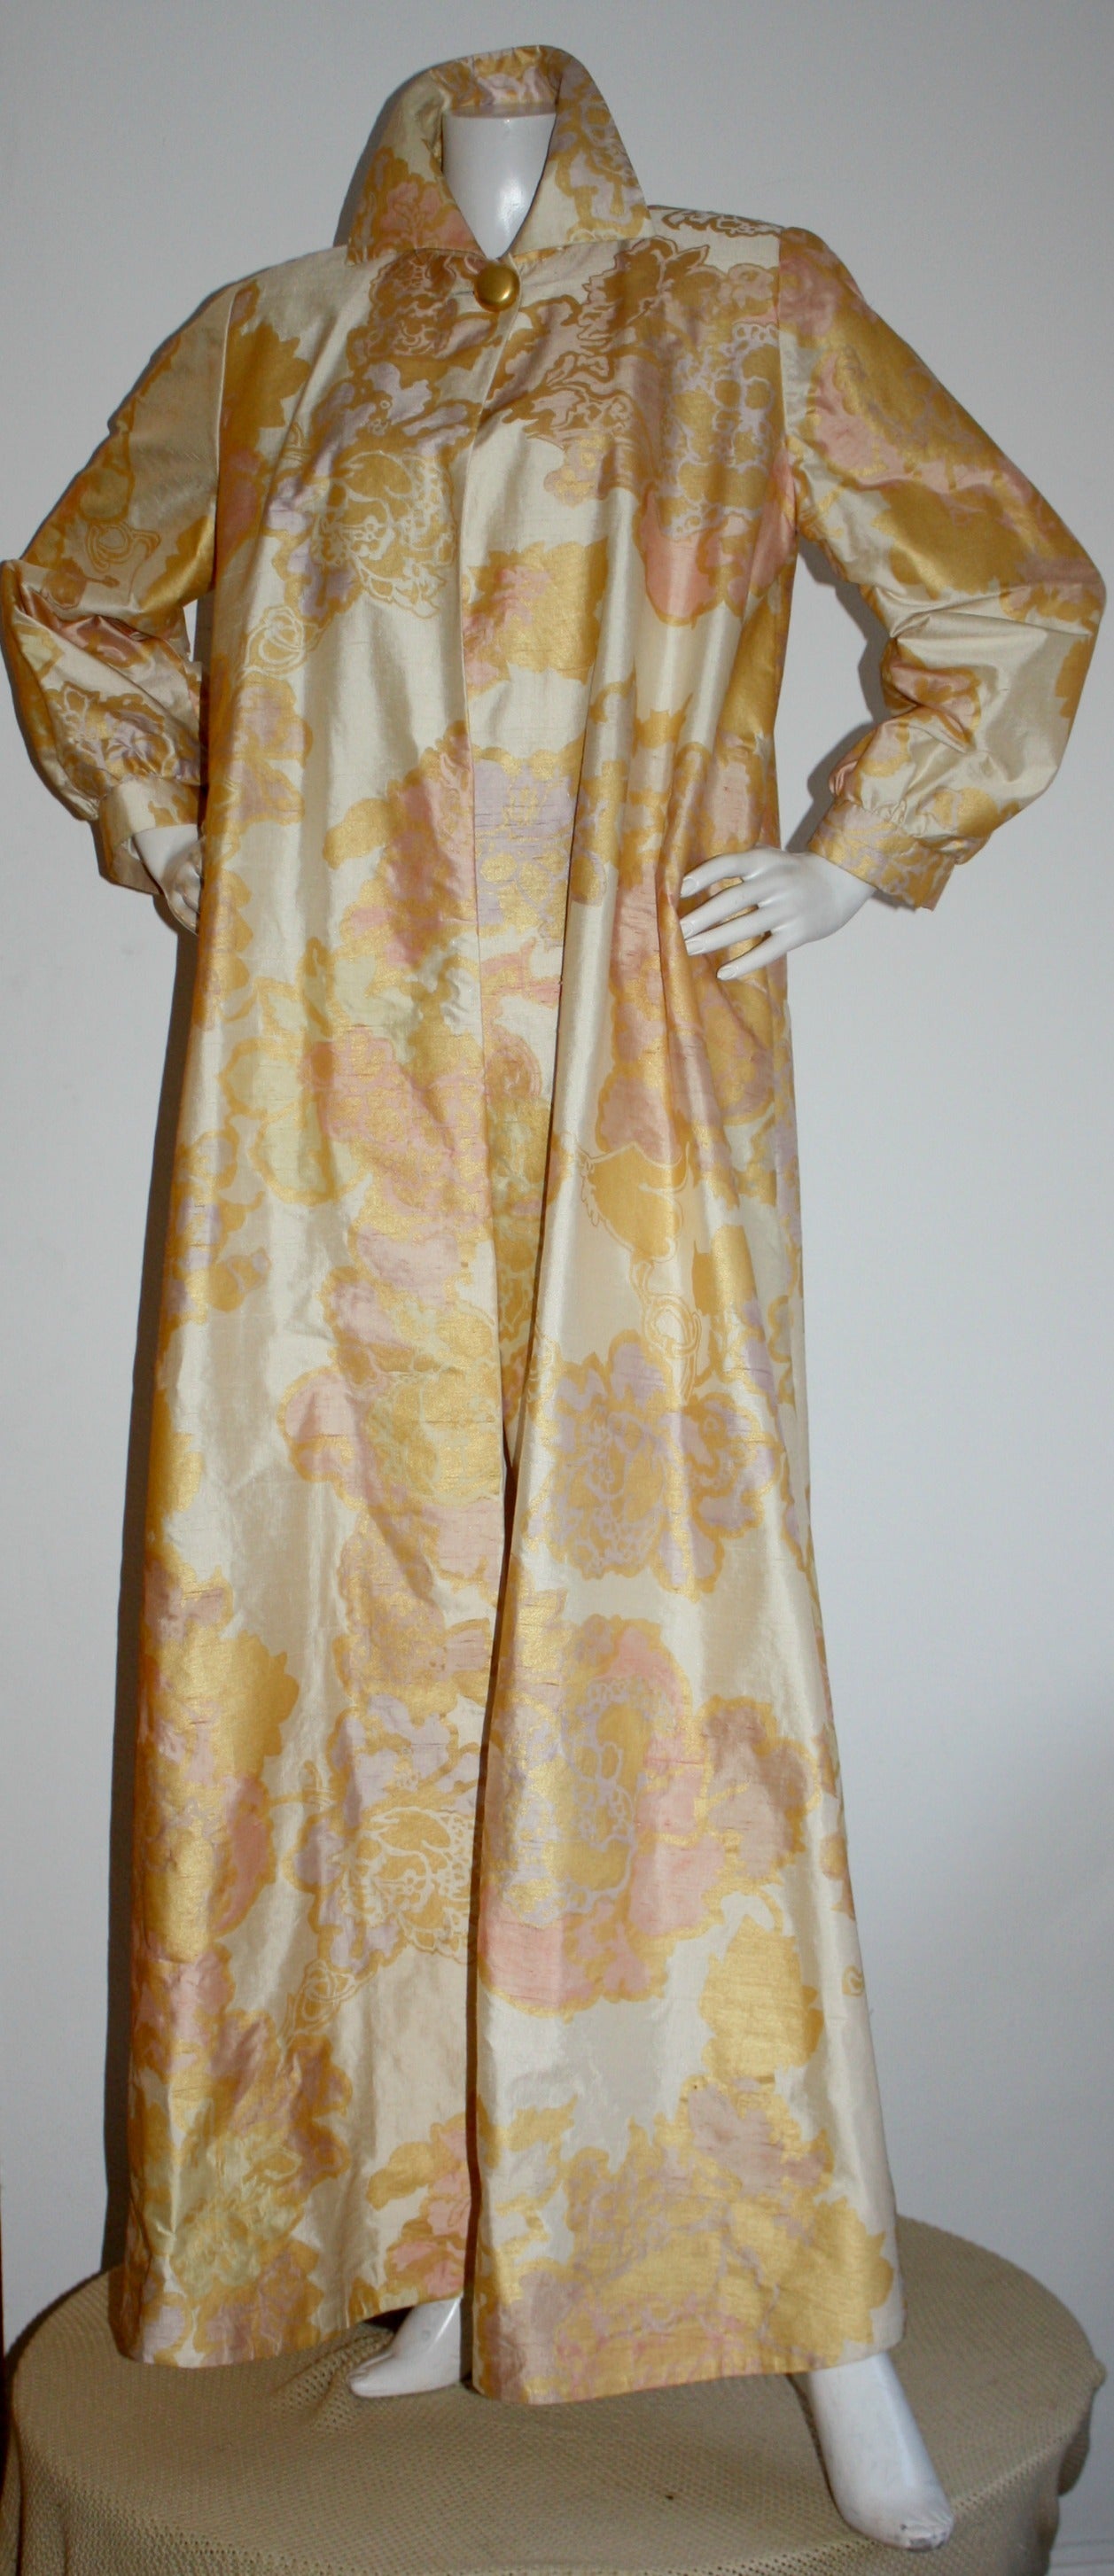 Insanely gorgeous vintage hand-painted silk opera coat! Dramatic ballon sleeves, with a single oversized gold button at neck. Metallic gold and pink throughout. Wonderfully constructed. Would look over a dress or gown, or perfected belted as a gown.